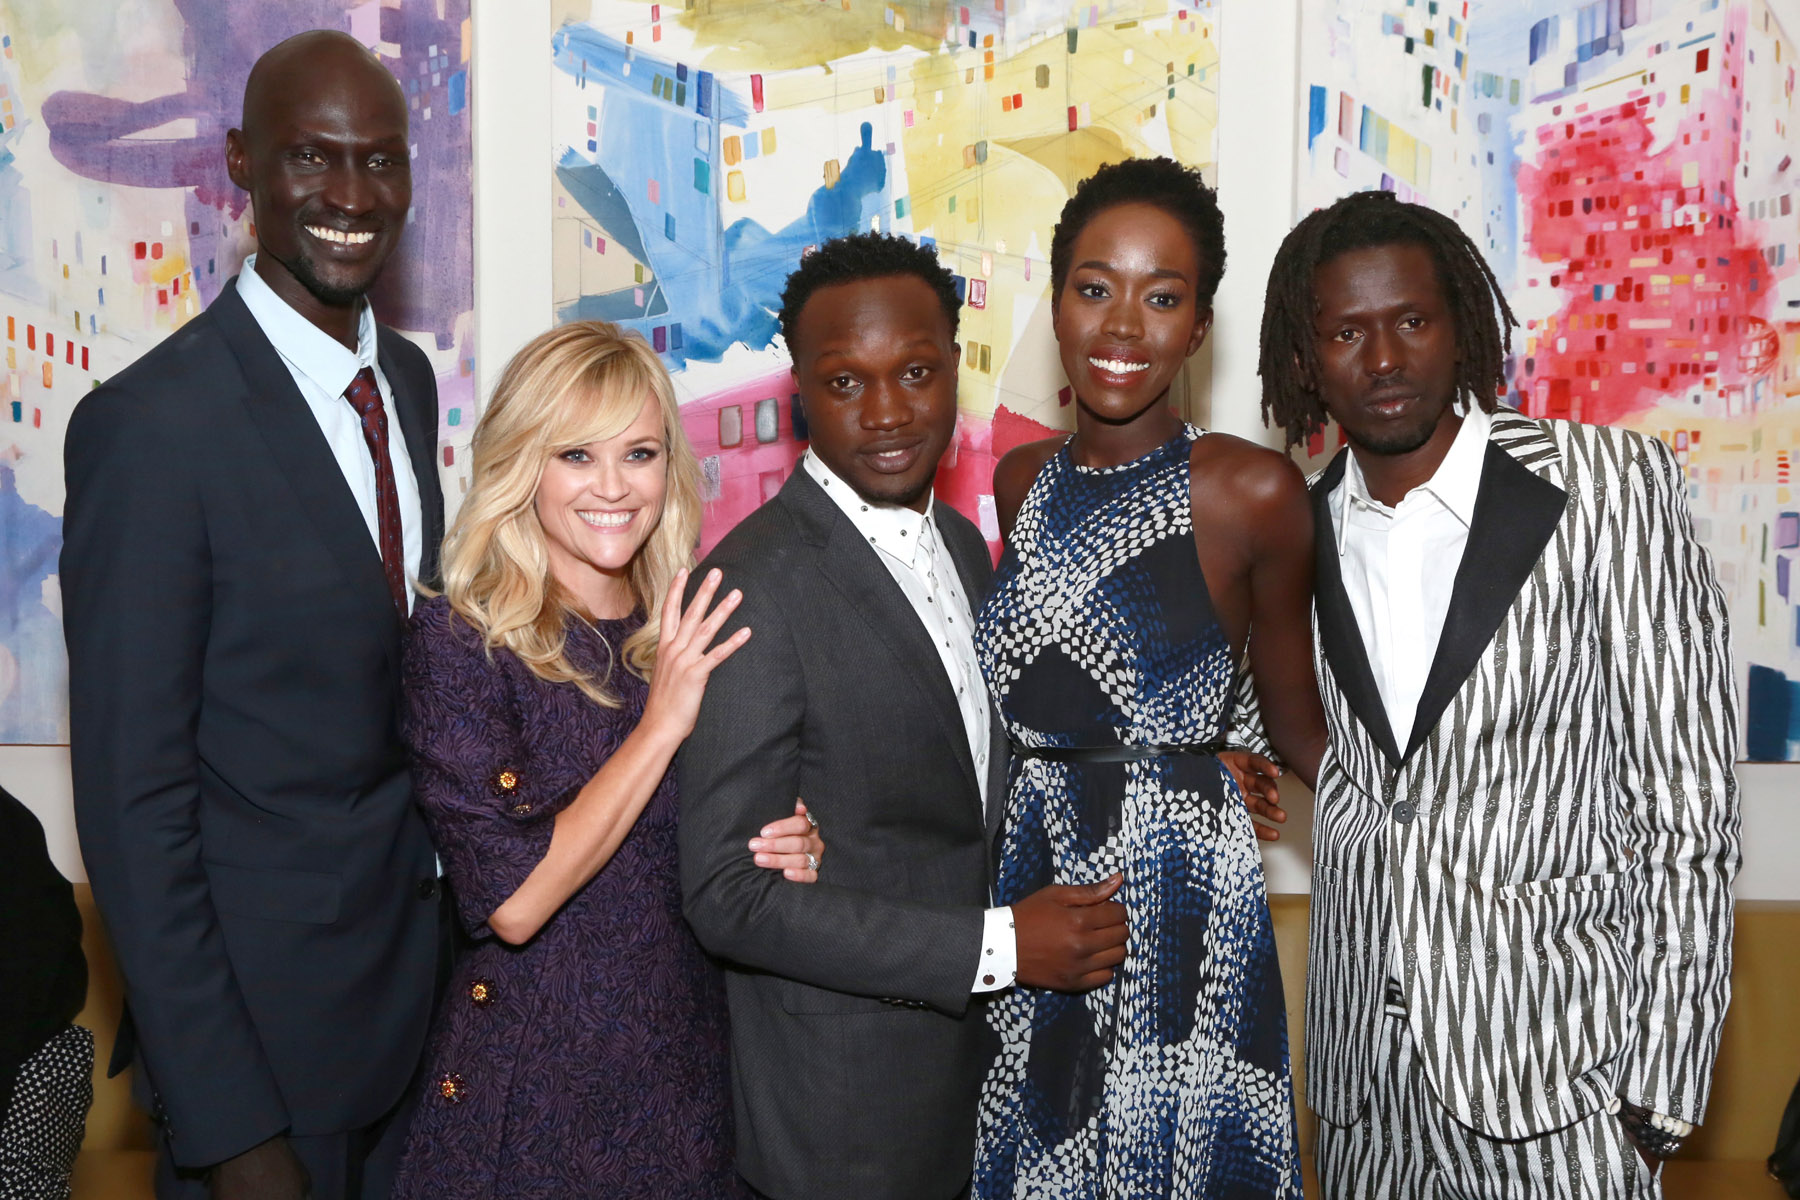 The cast of The Good Lie at TIFF. Ger Duany, Reese Witherspoon, Kuoth Wiel, and Emmanuel Jal.